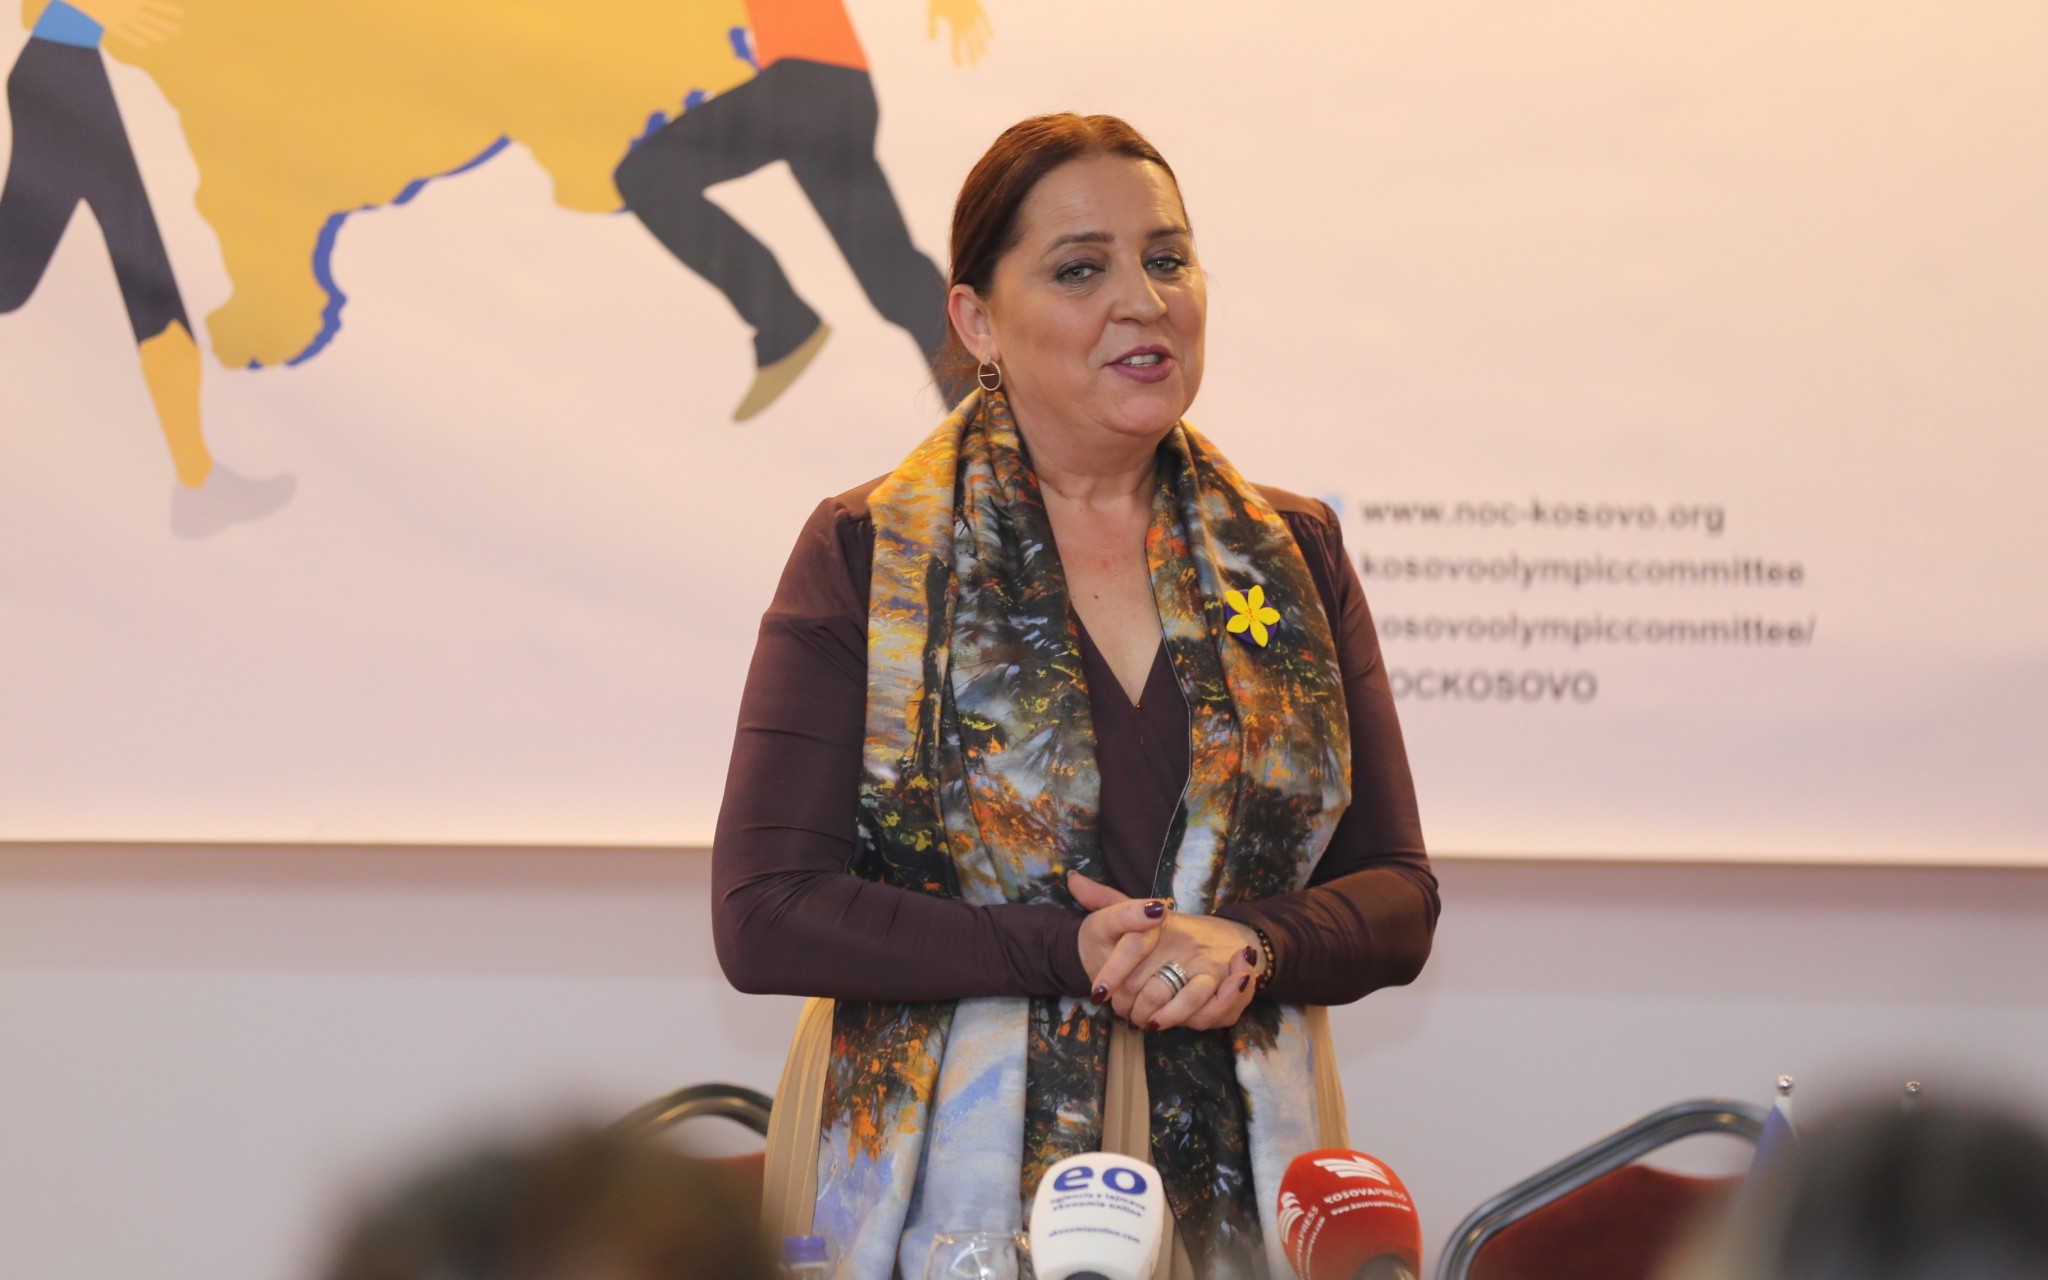 Kosovo's Minister of Culture, Youth and Sport, Vlora Dumoshi, was among those in attendance at the event ©OCK